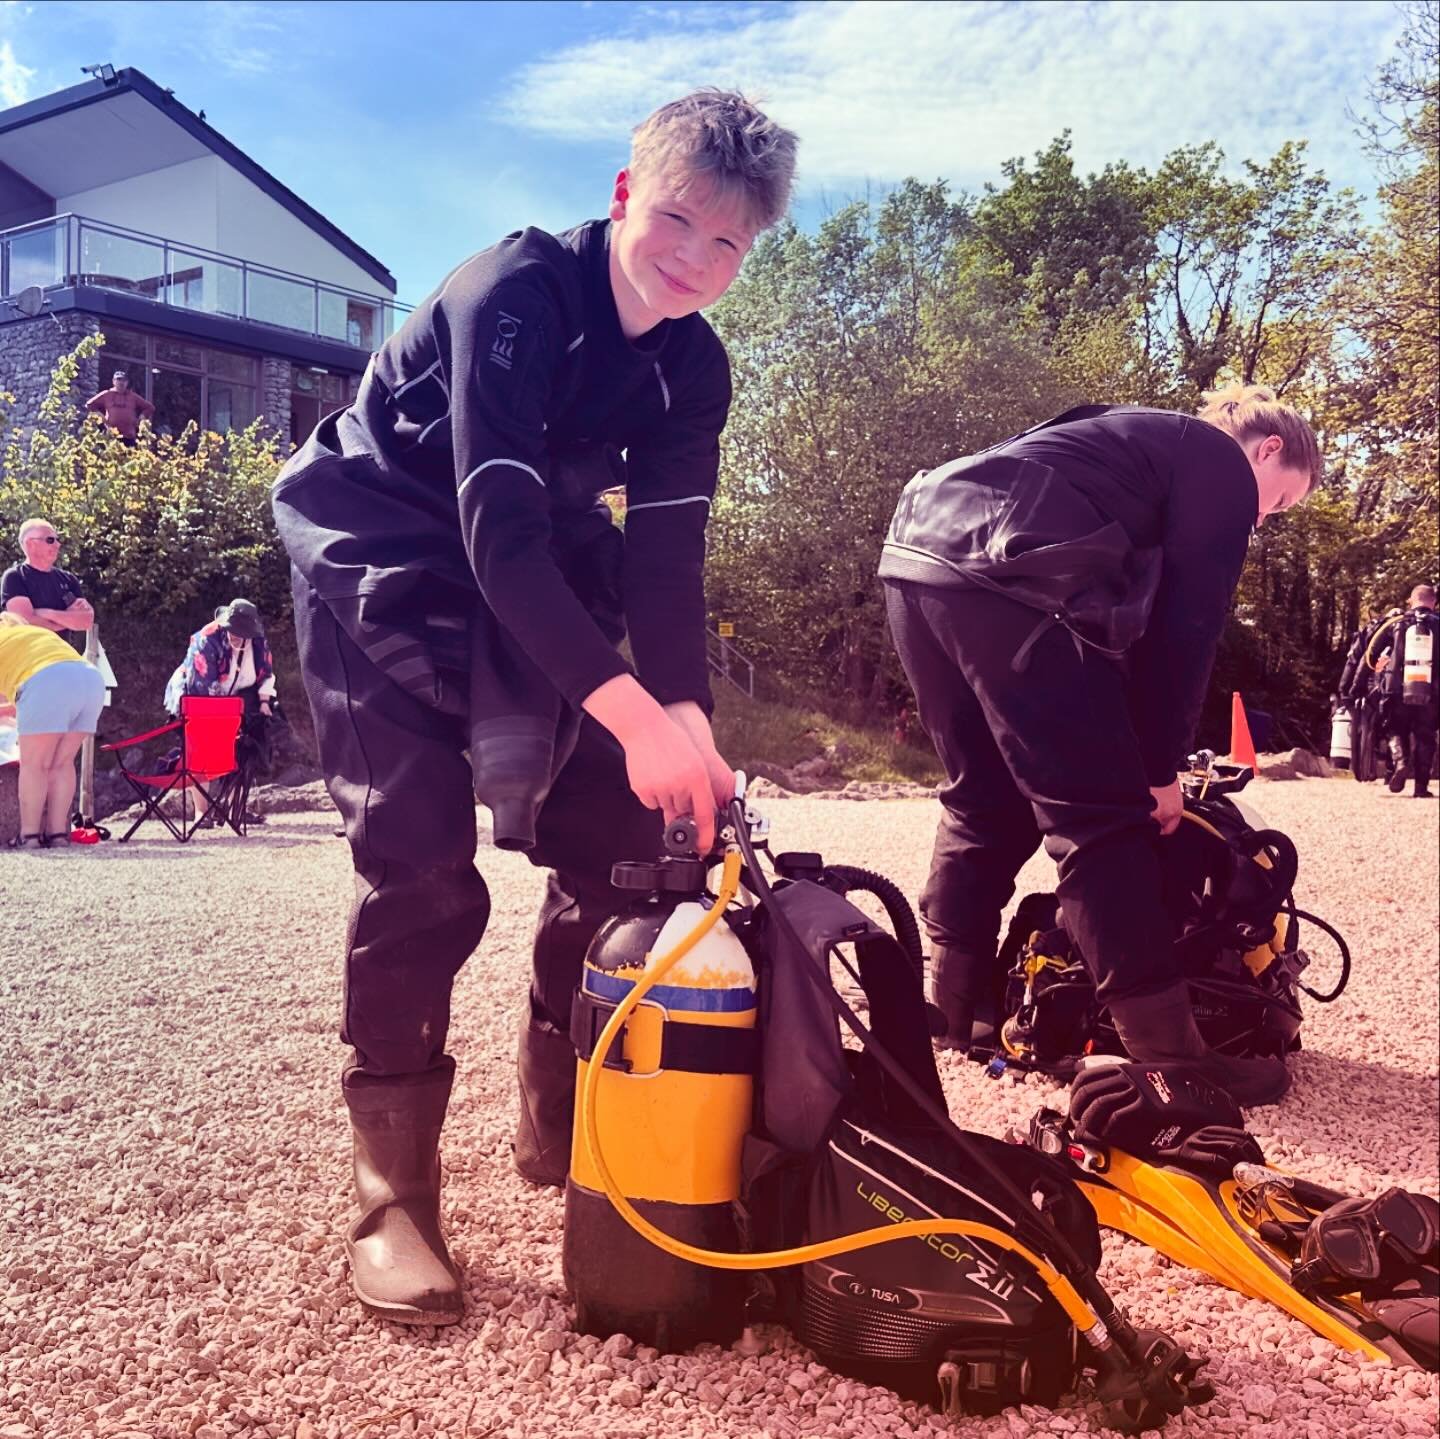 @joe_baaaarry - started his GCSEs last week and to throw in an extra challenge, he&rsquo;s doing his Open Water Certification this weekend! After a solid start, JKB is more than halfway through. The final push tomorrow.

#Scuba #ScubaDiver #PADI #Ope